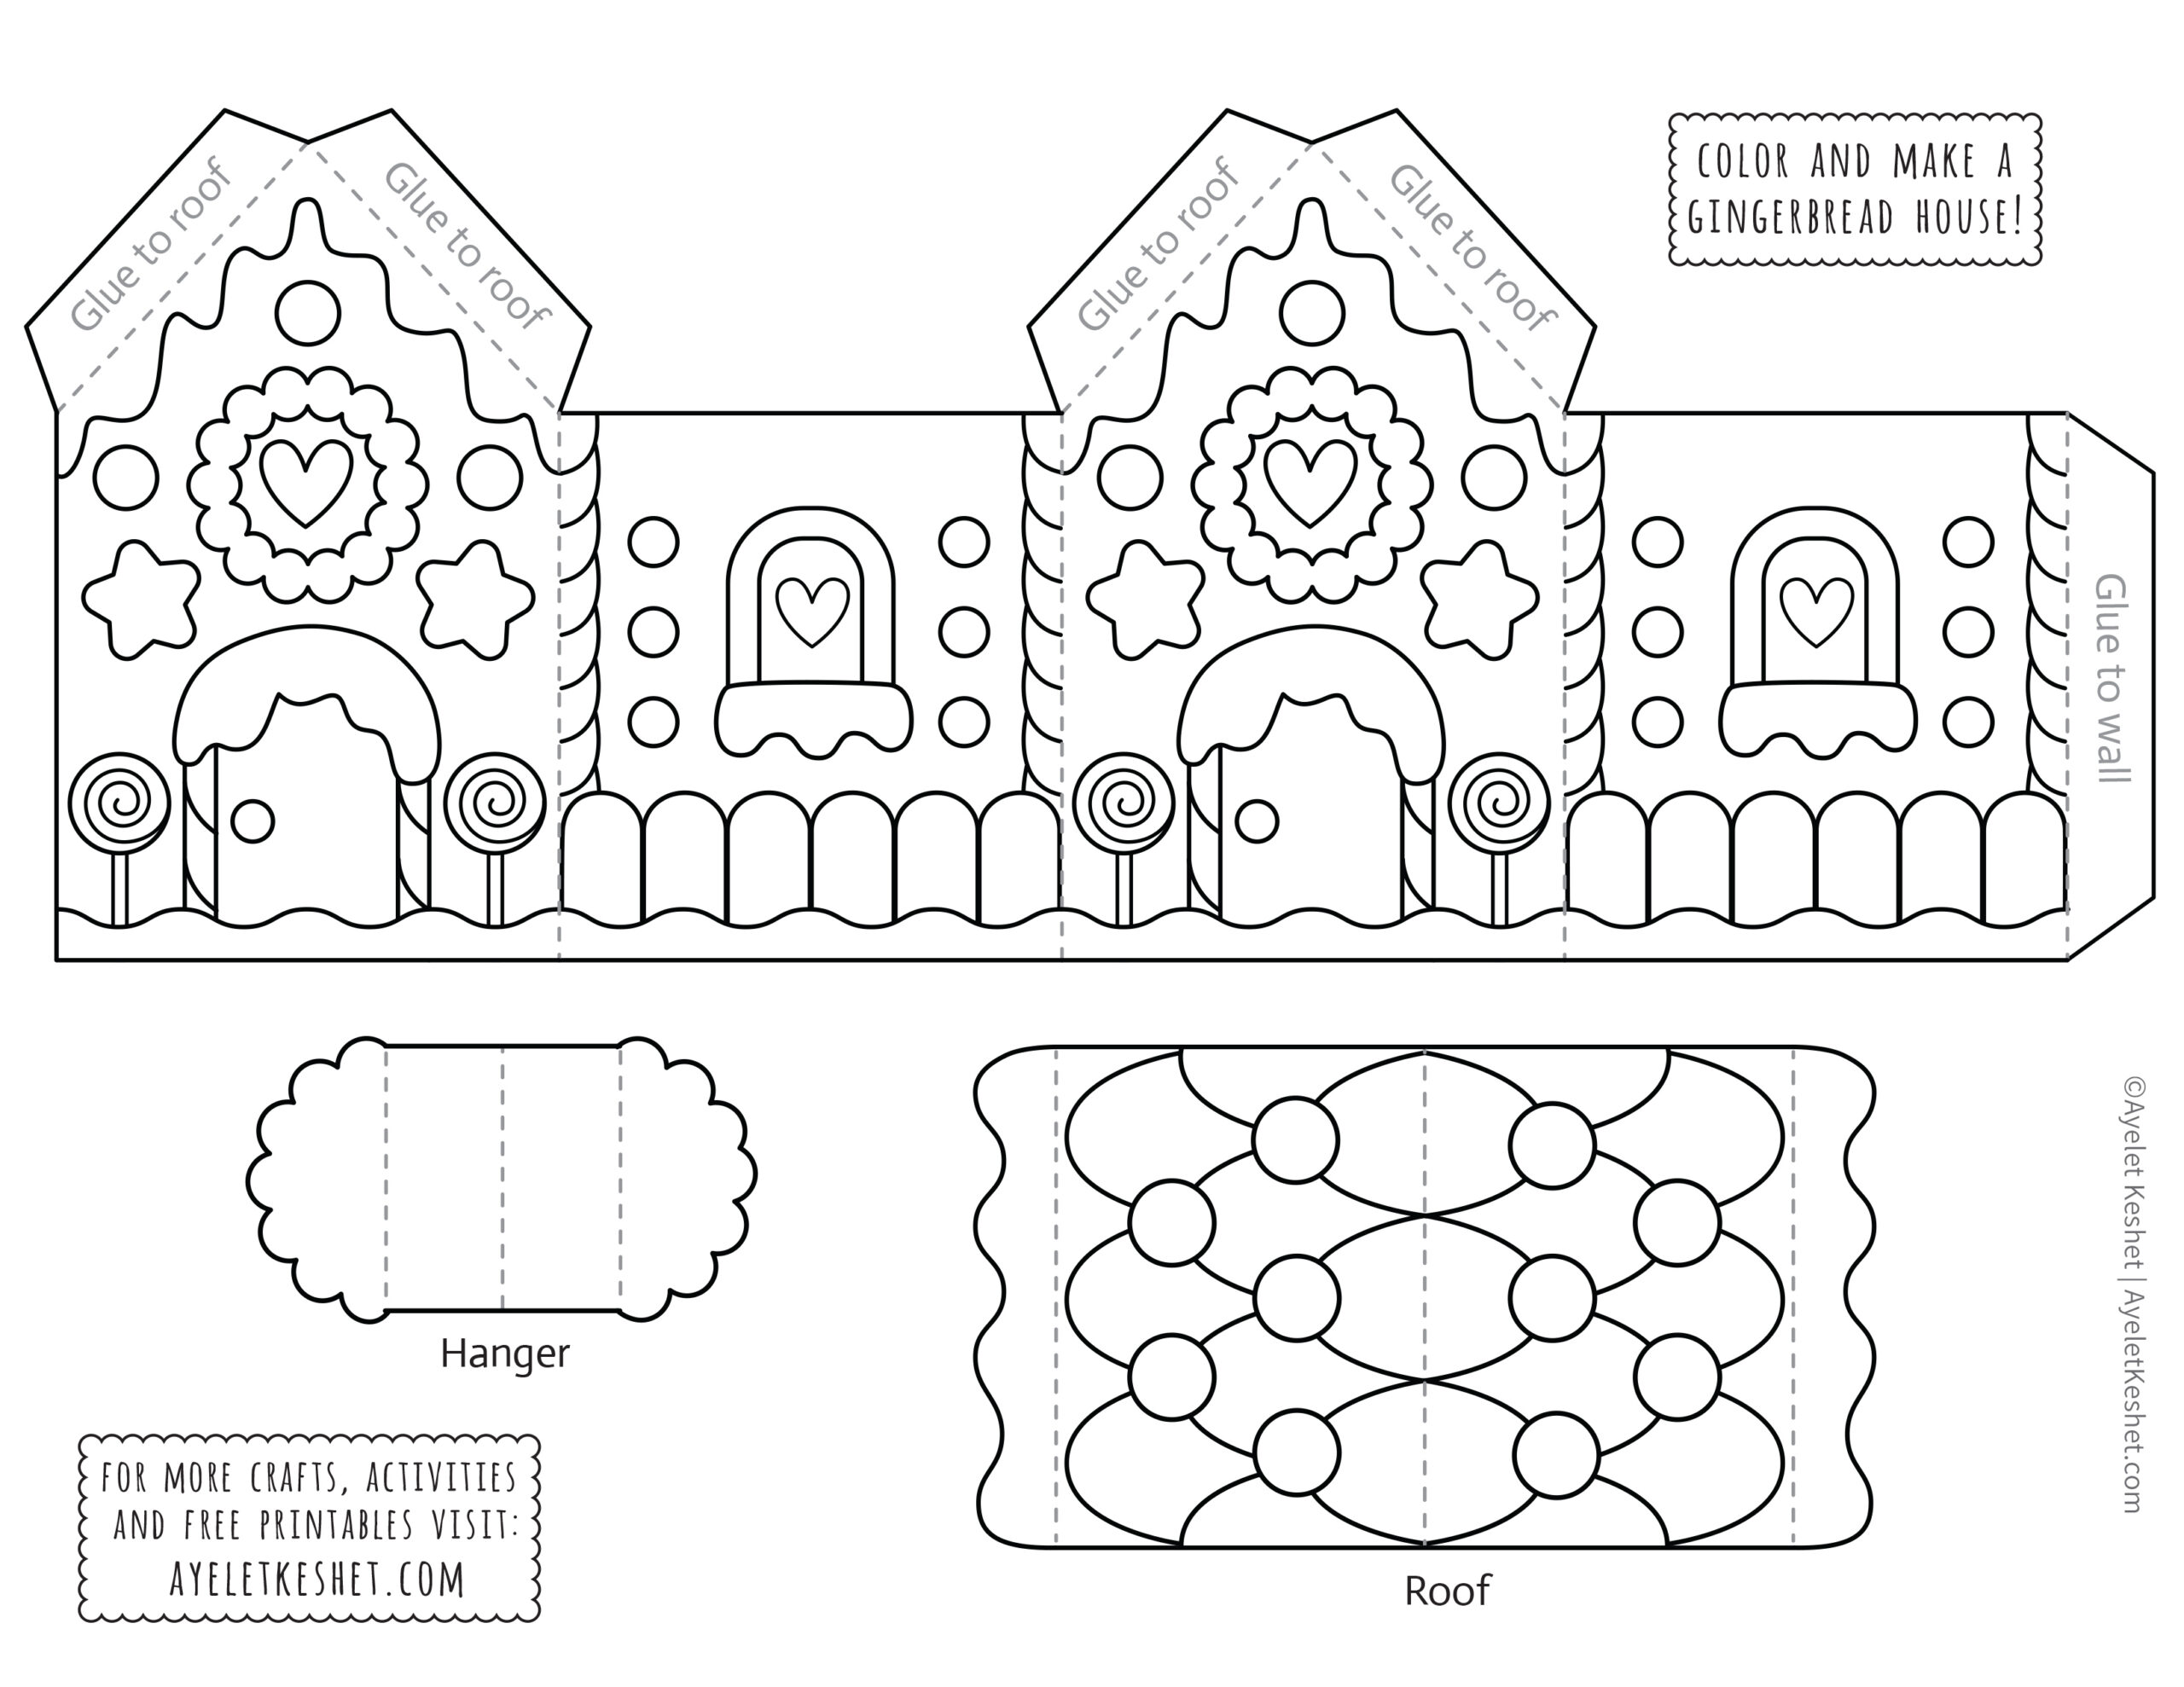 Printable Gingerbread House Template To Color - Ayelet Keshet pertaining to Free Gingerbread House Printables